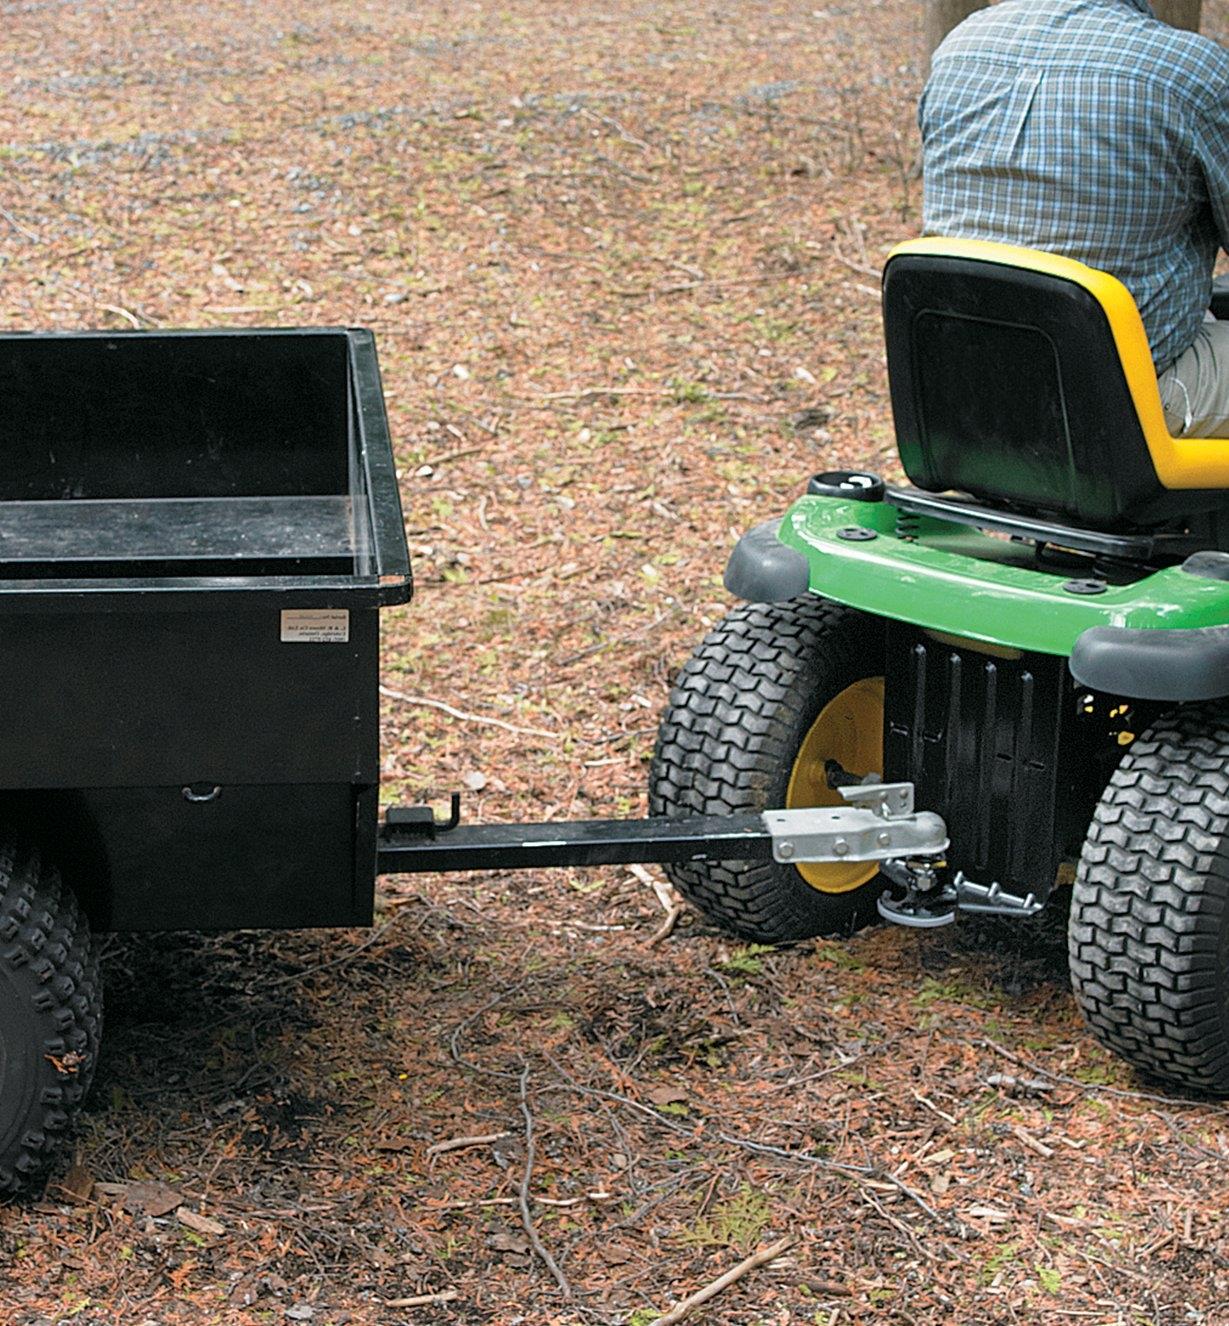 Universal Hitch Plate installed on a riding tractor that is pulling a wagon